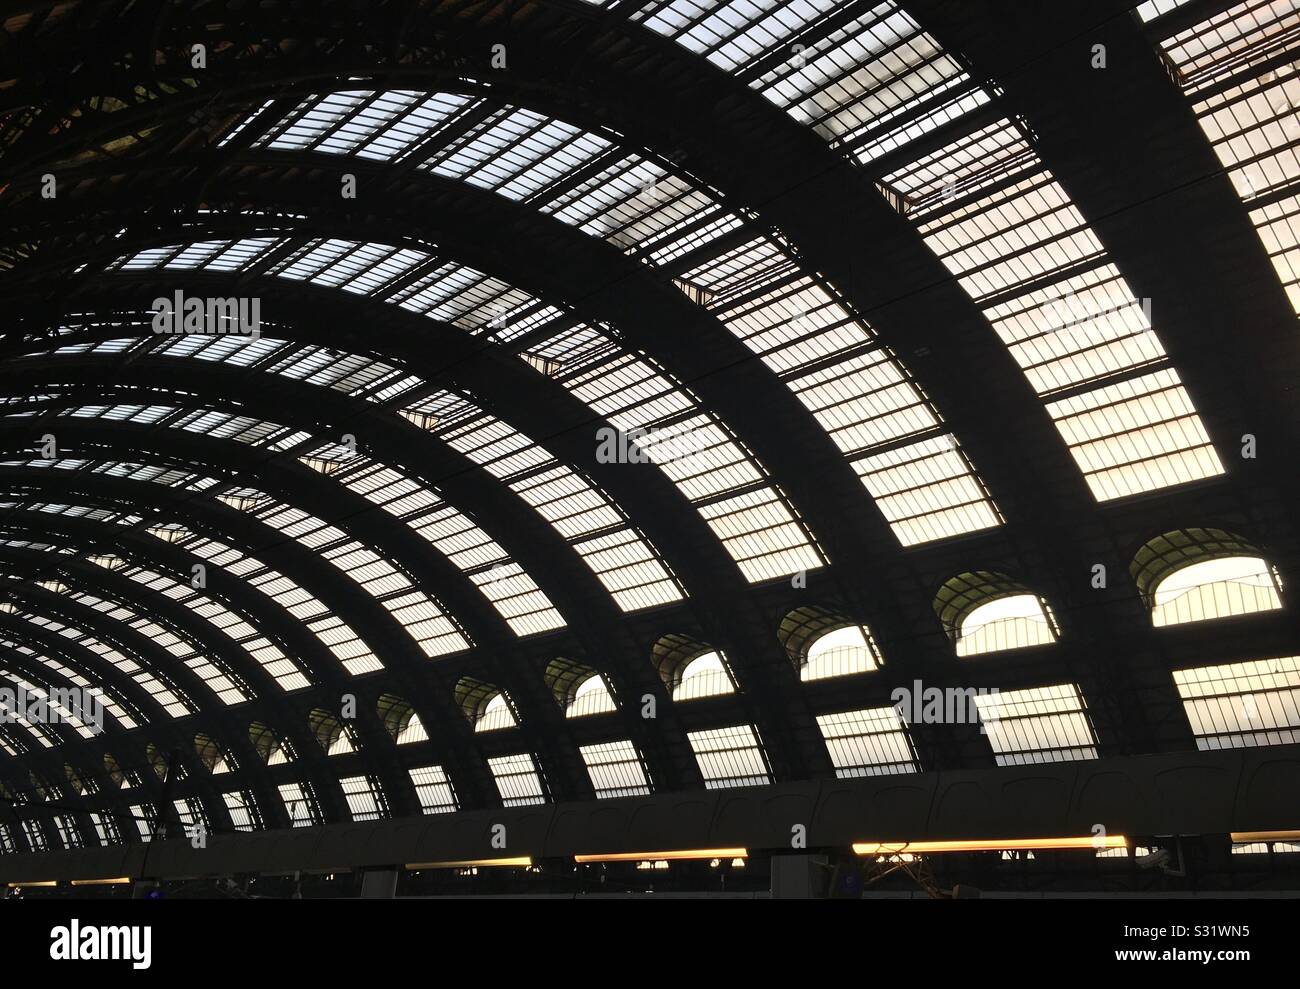 Central station of Milano Italy. View of ceiling with the metallic casing Stock Photo